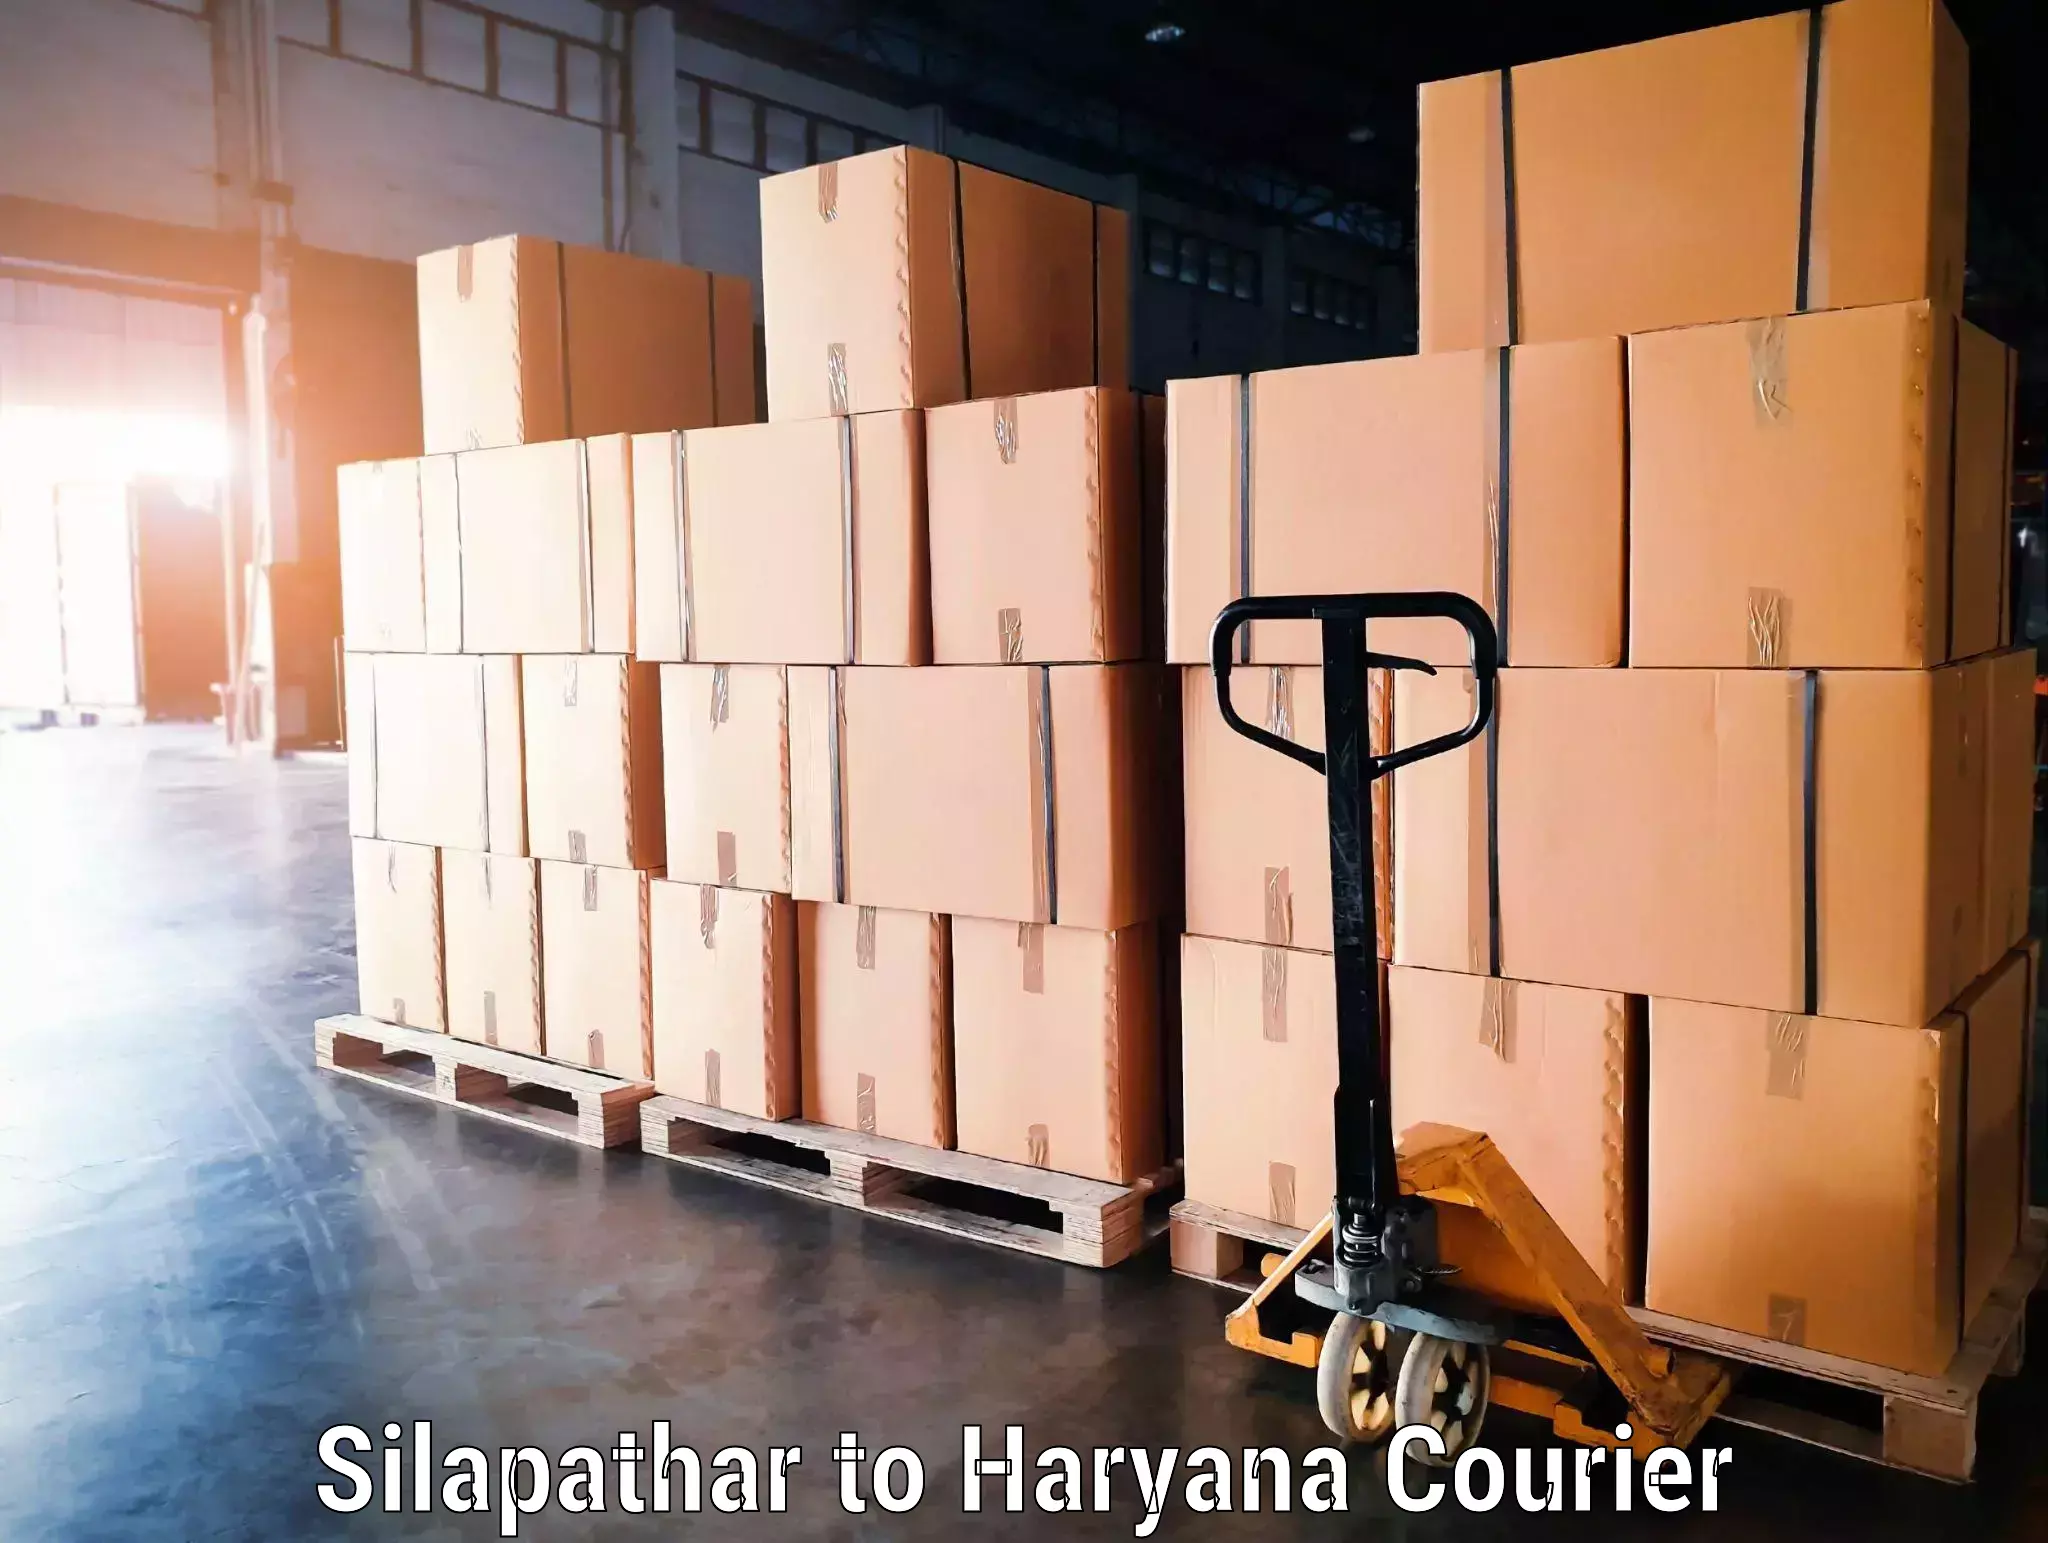 Luggage transport consultancy Silapathar to Gurugram